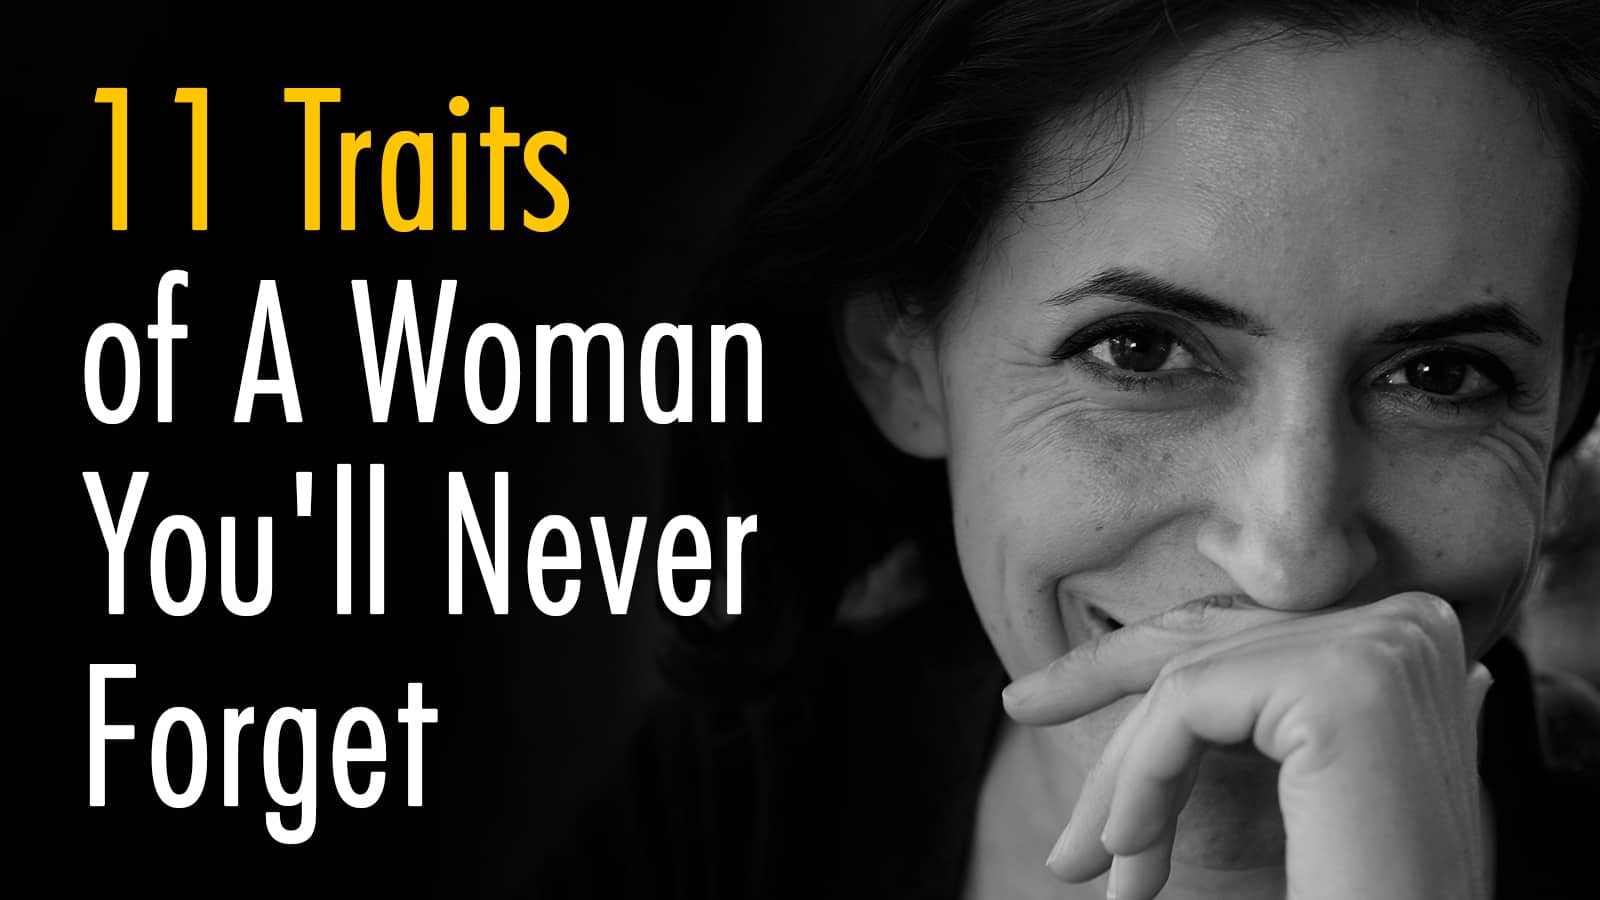 11 Traits of A Woman You’ll Never Forget